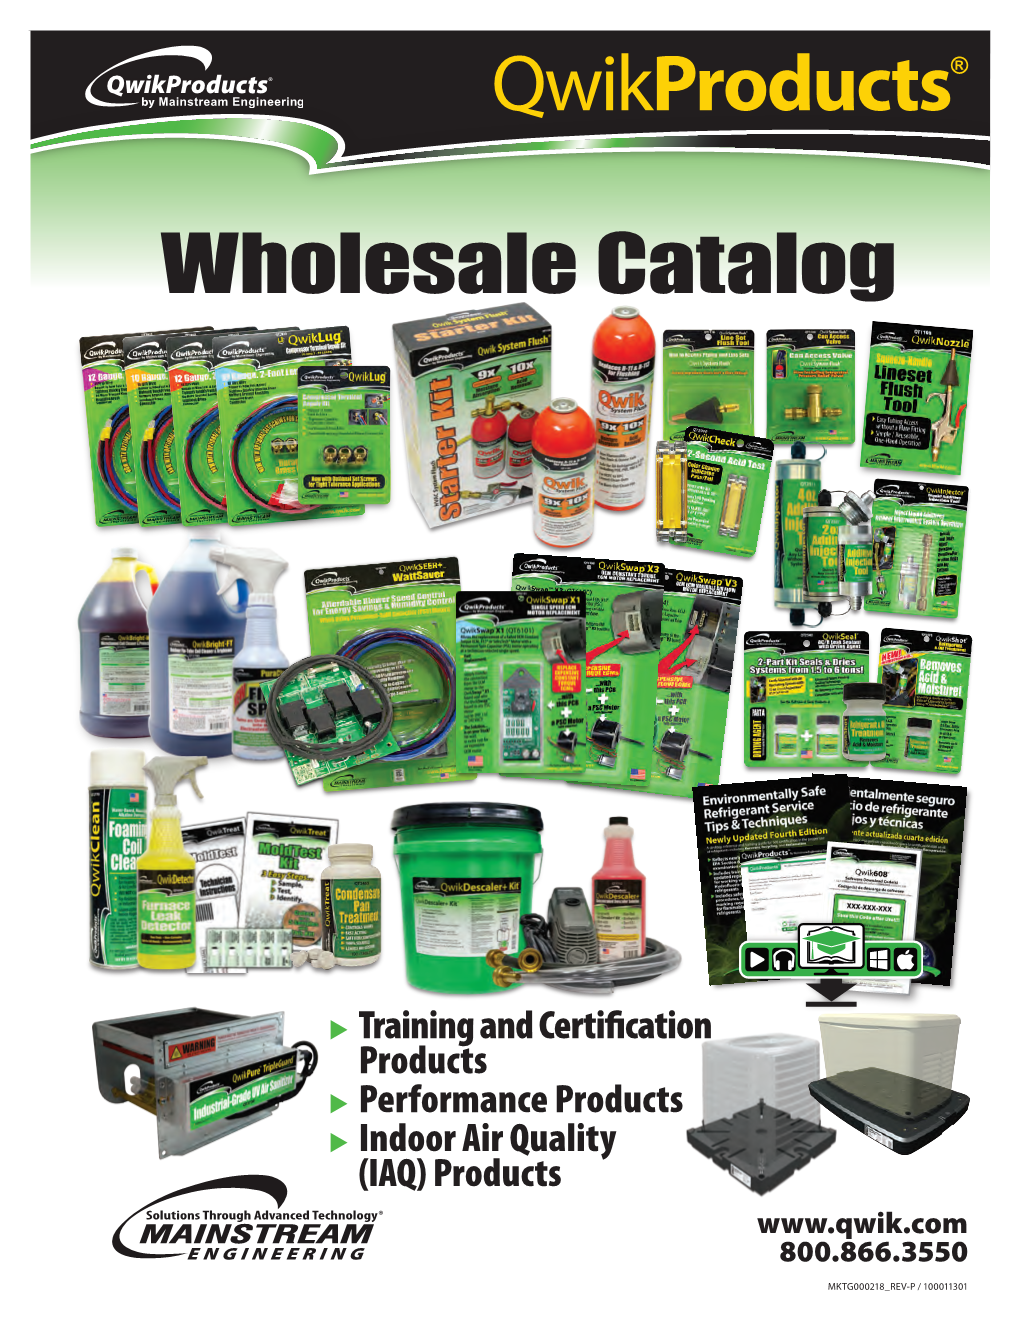 Qwikproducts™ Catalog